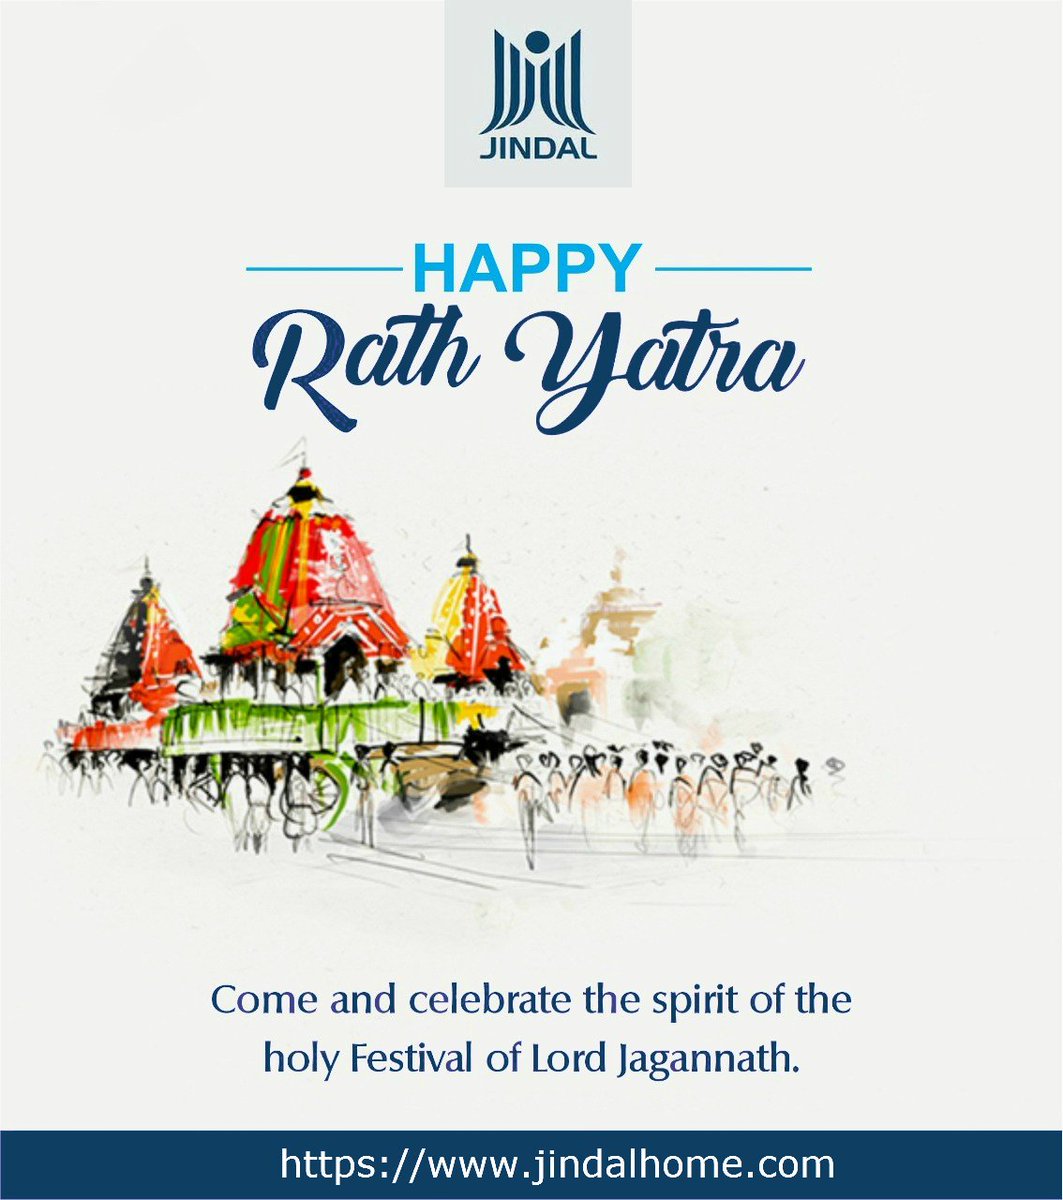 🚩 Happy Rath Yatra 🚩
Come and Celebrate the Spirit of the Holy Festival of Lord Jagannath. #HappyRathayatra #RathYatra #RathYatraFestival #RathYatra2019 #RathYatraAhmedabad #Jagannath #JaiJagannath #jindalhome #Textilemill #jindalhomeahmedabad #ahmedabadtextile